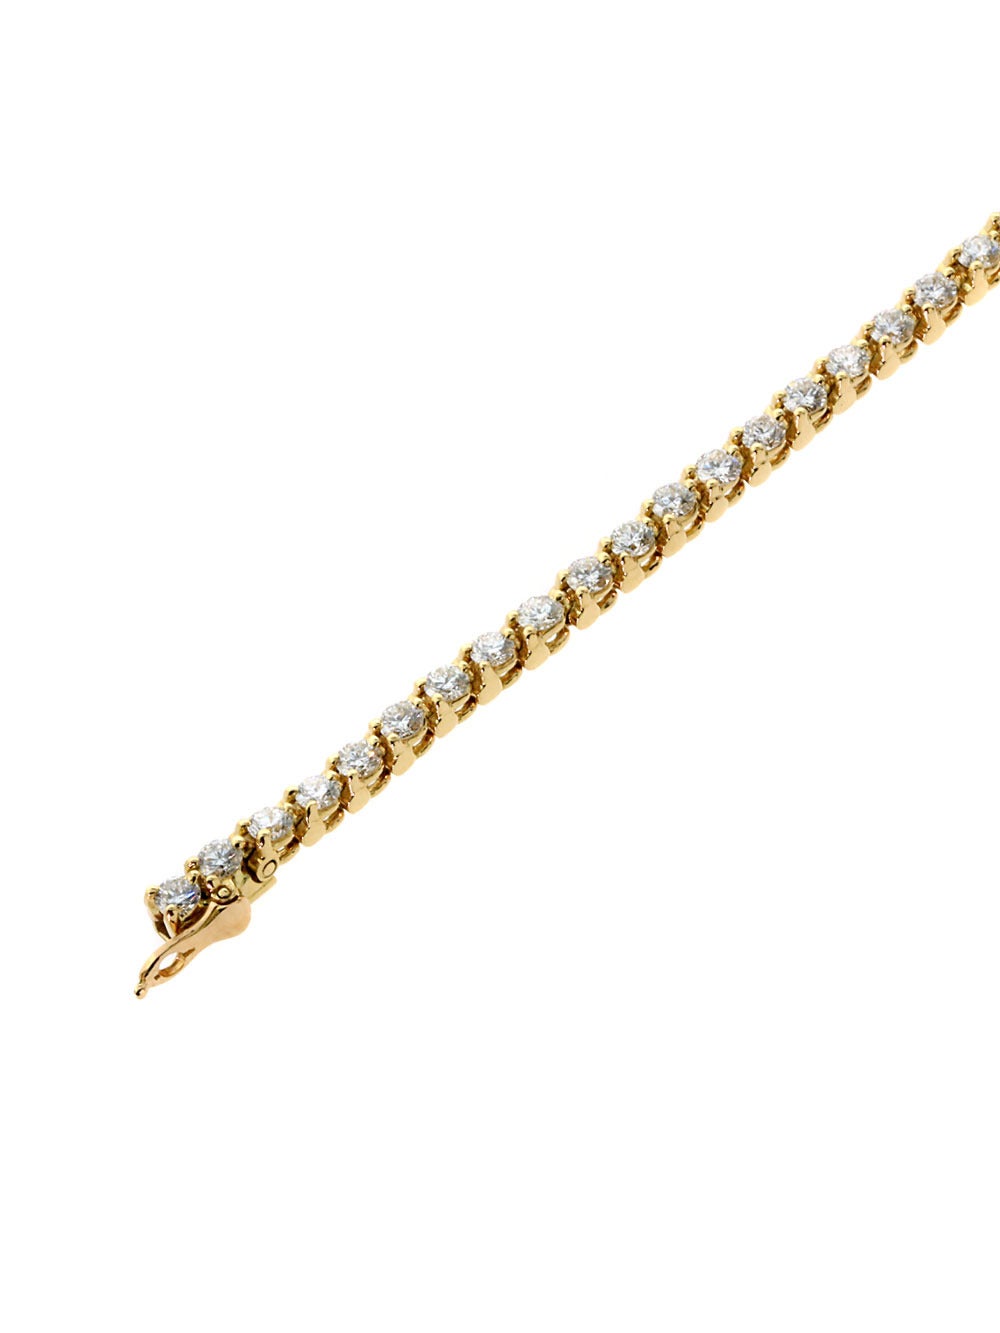 A fabulous addition to any wardrobe, this magnificent authentic Cartier tennis bracelet is the perfect piece for everyday wear set with the finest Cartier round brilliant cut diamonds weighing a total of 3ct appx set in 18k yellow gold.

Length: 6